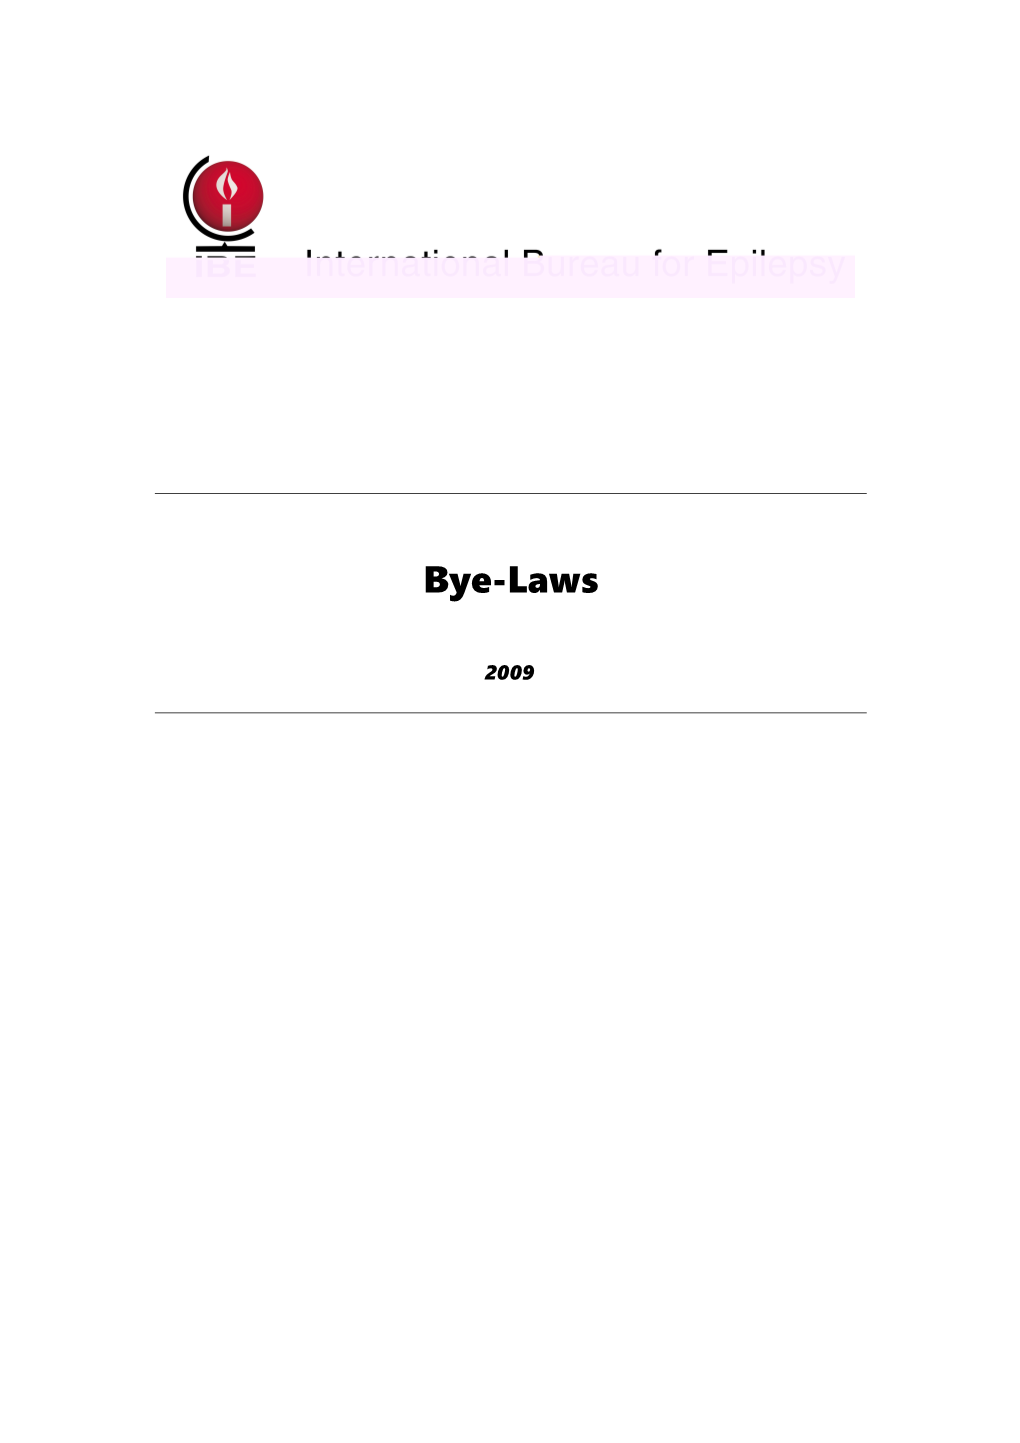 IBE Constitution and Bye-Laws 2004